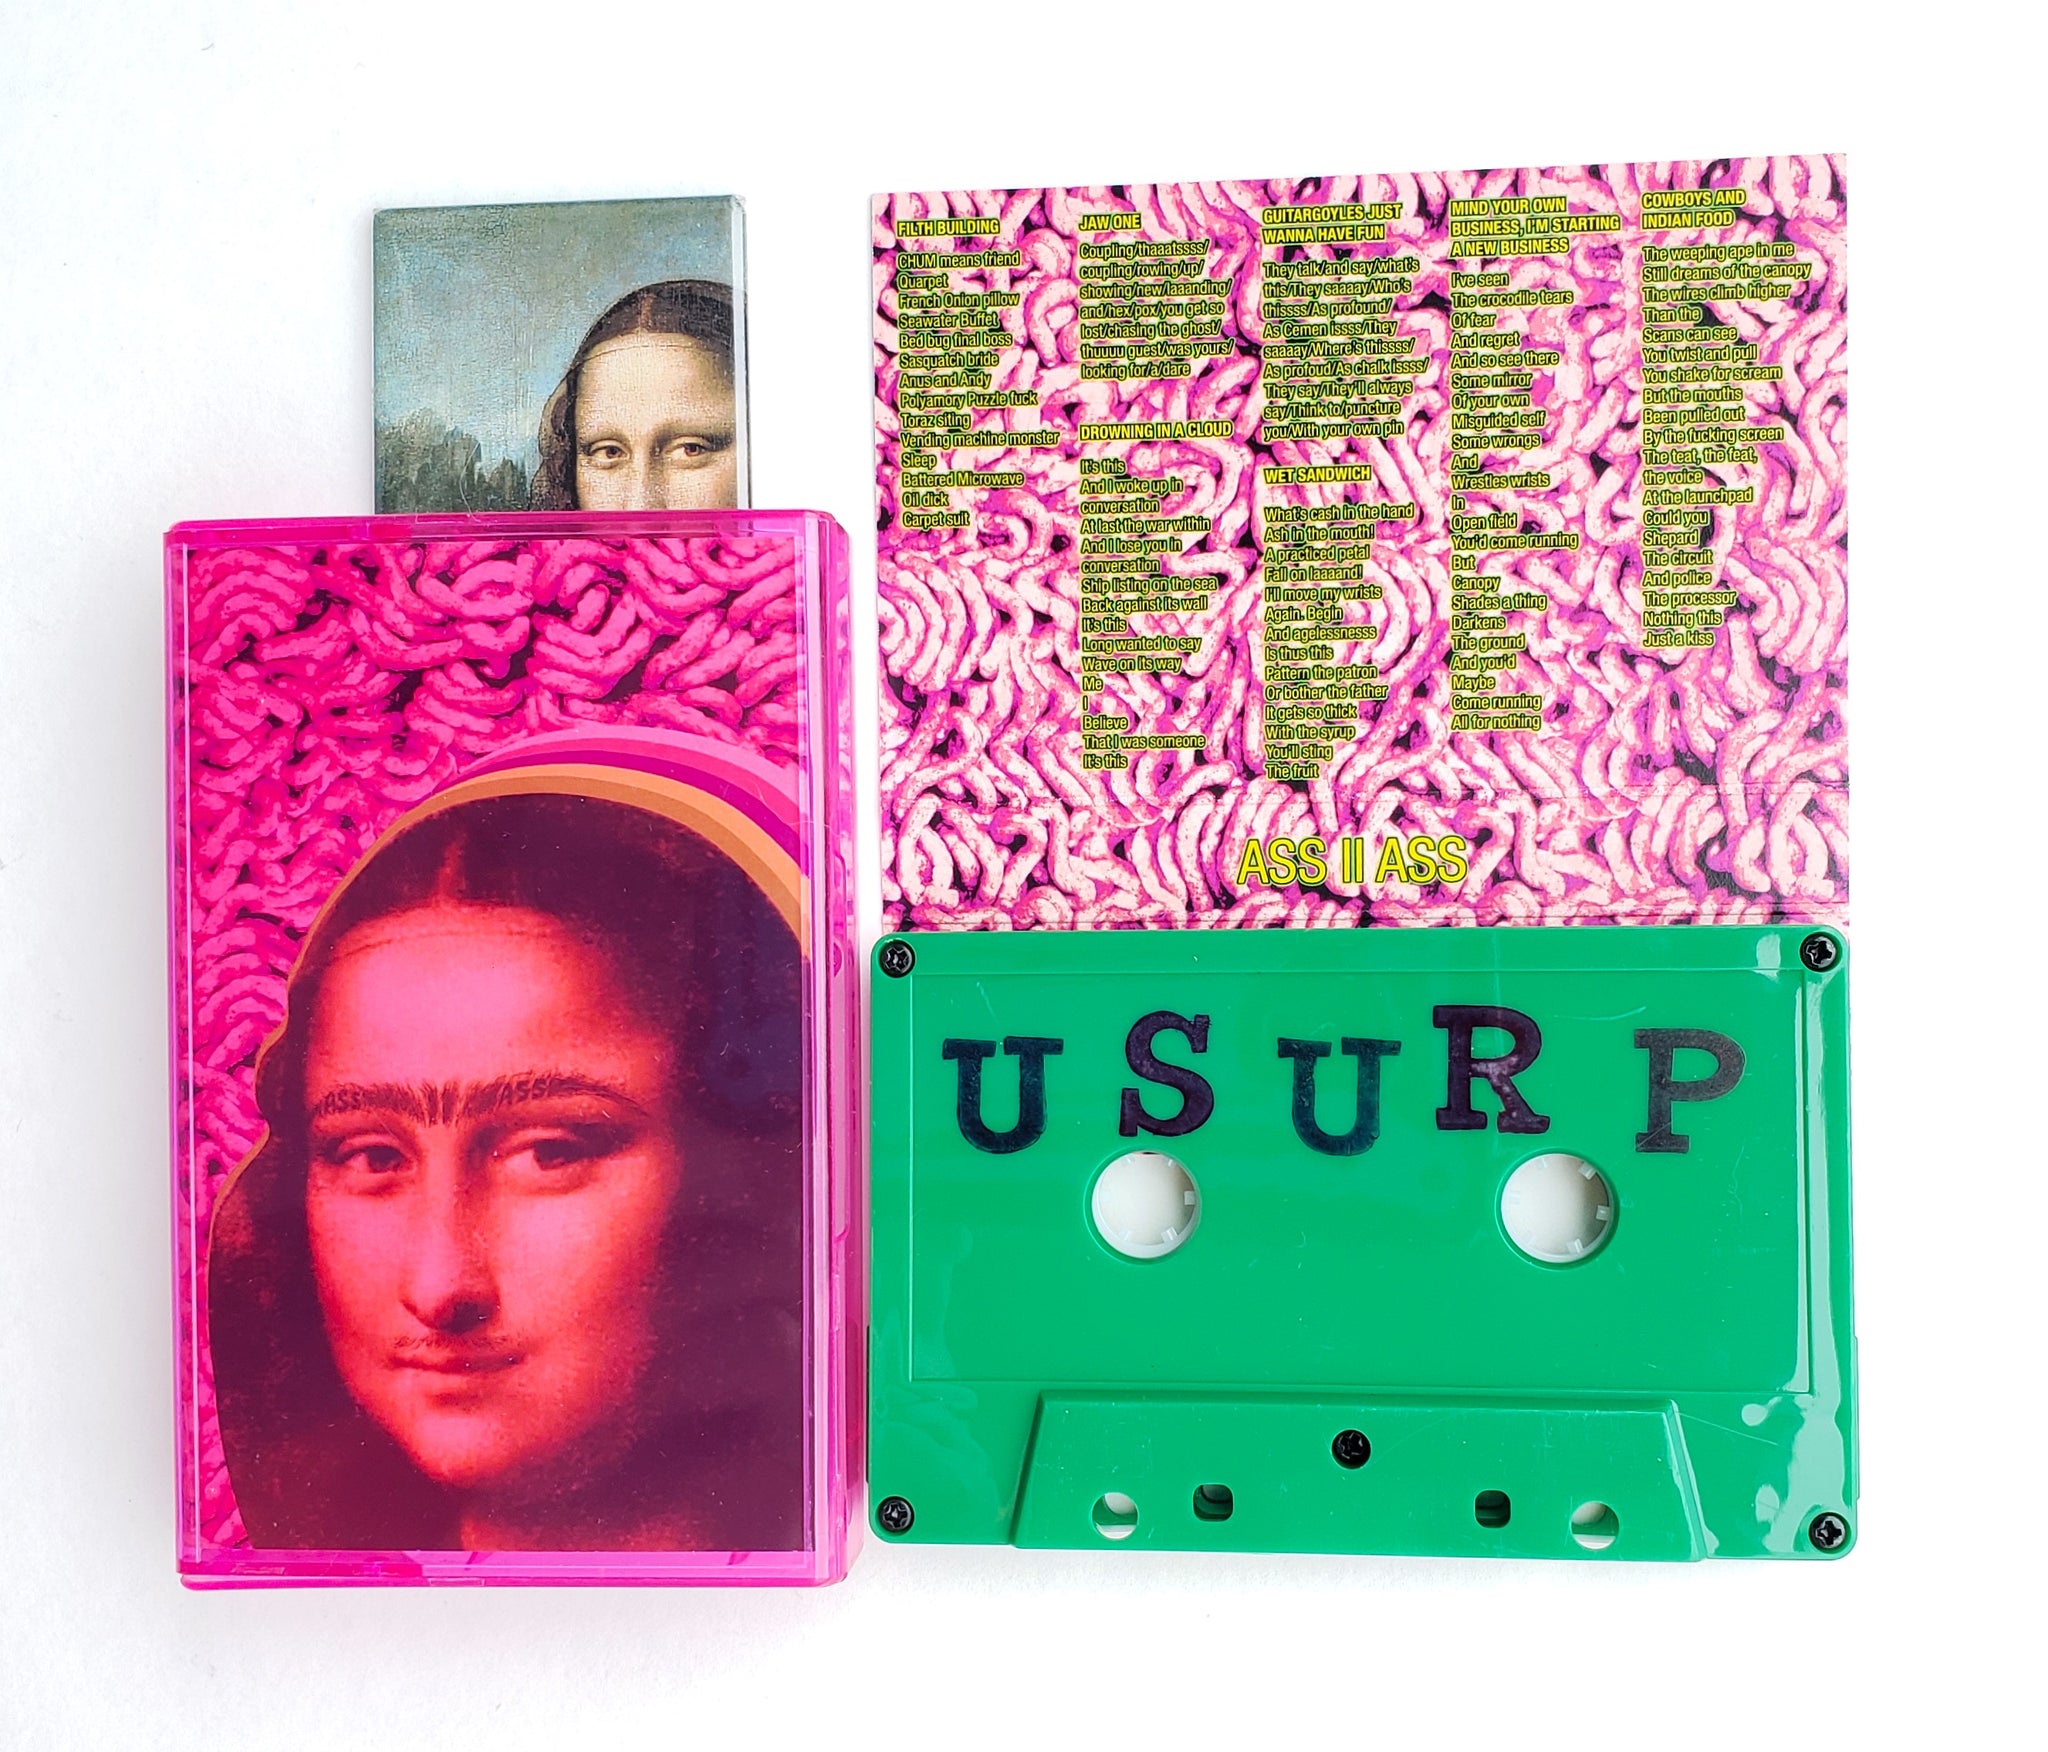 USURP SYNAPSE - Polite Grotesqueries - AssIIAss edition (tape)